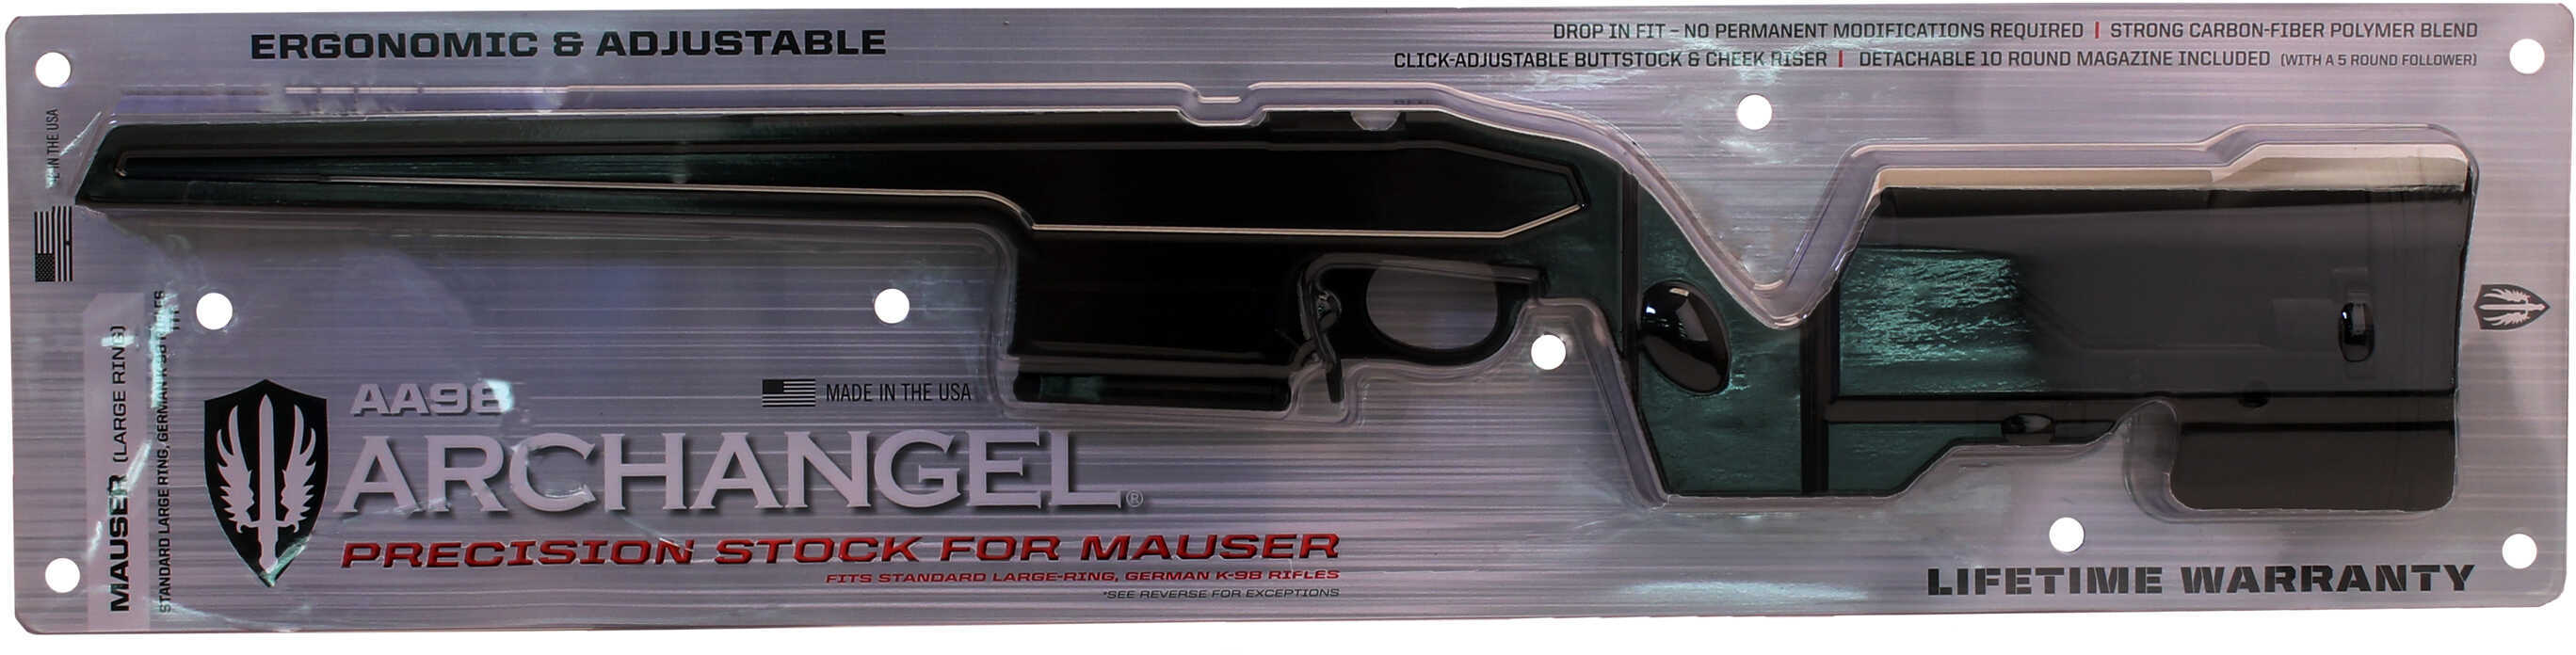 ProMag Archangel Mauser Precision Stock- Black Md: AA98